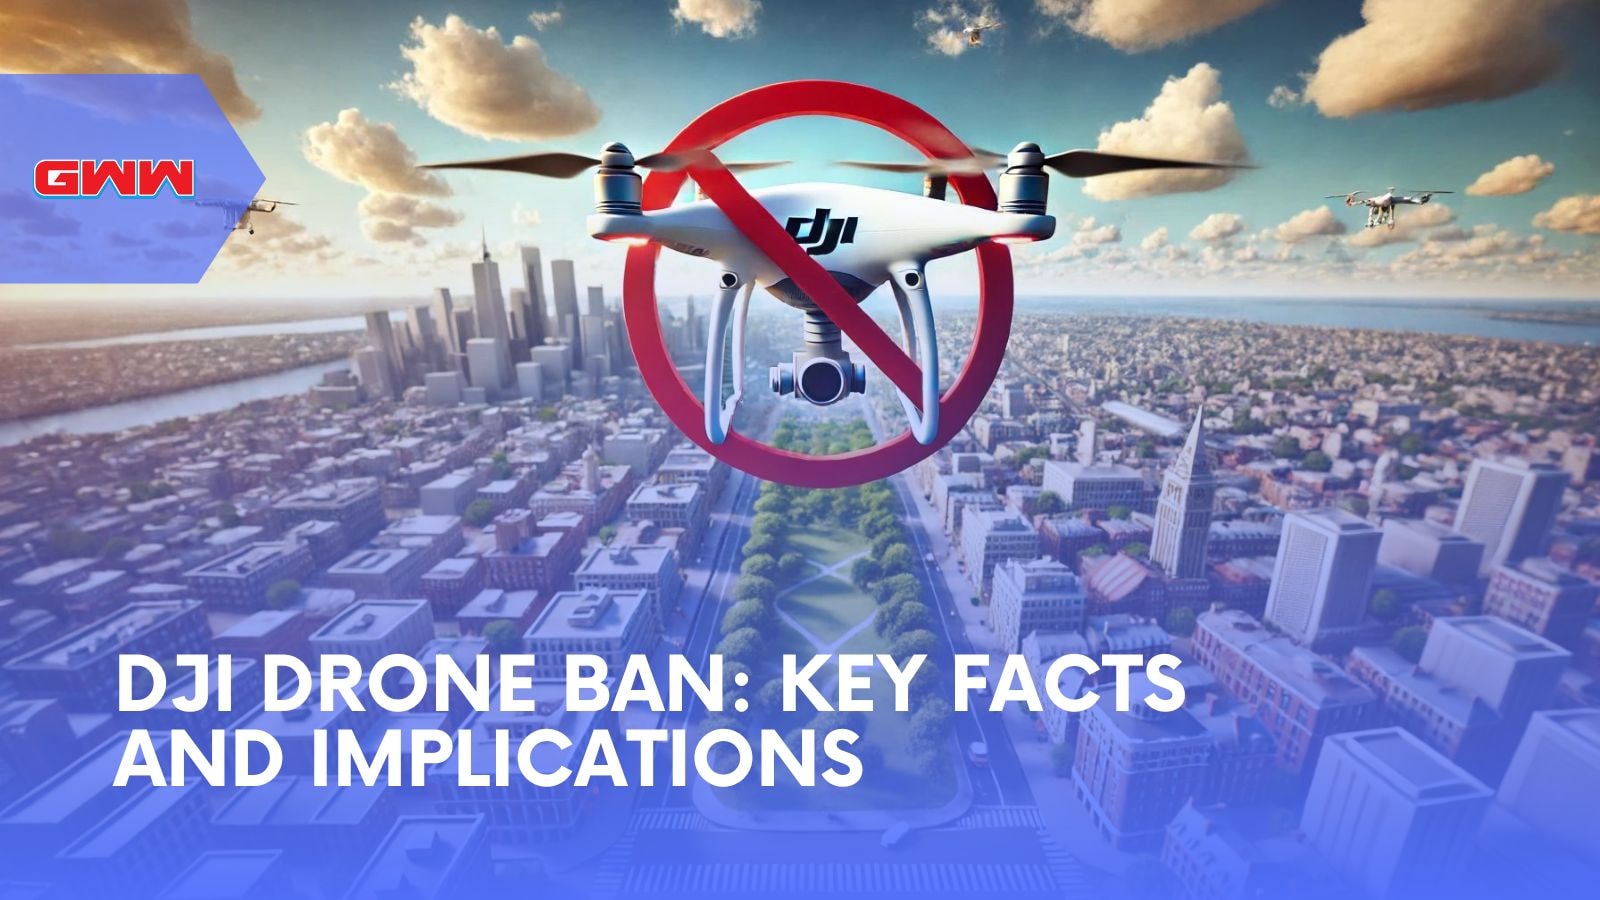 DJI Drone Ban: Key Facts and Implications